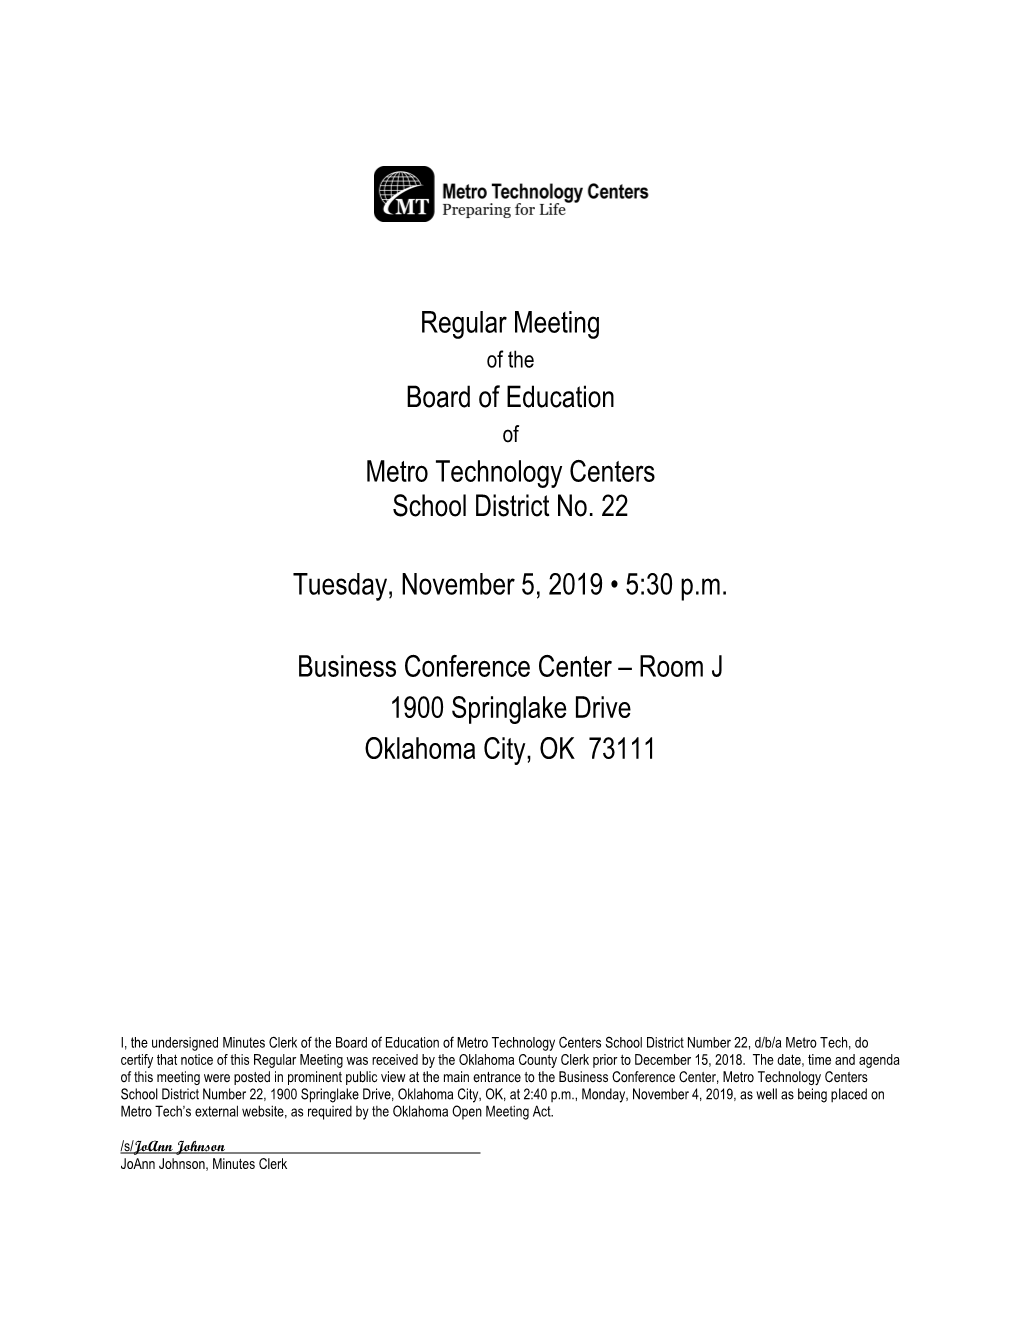 Regular Meeting Board of Education Metro Technology Centers School District No. 22 Tuesday, November 5, 2019 • 5:30 P.M. Busin